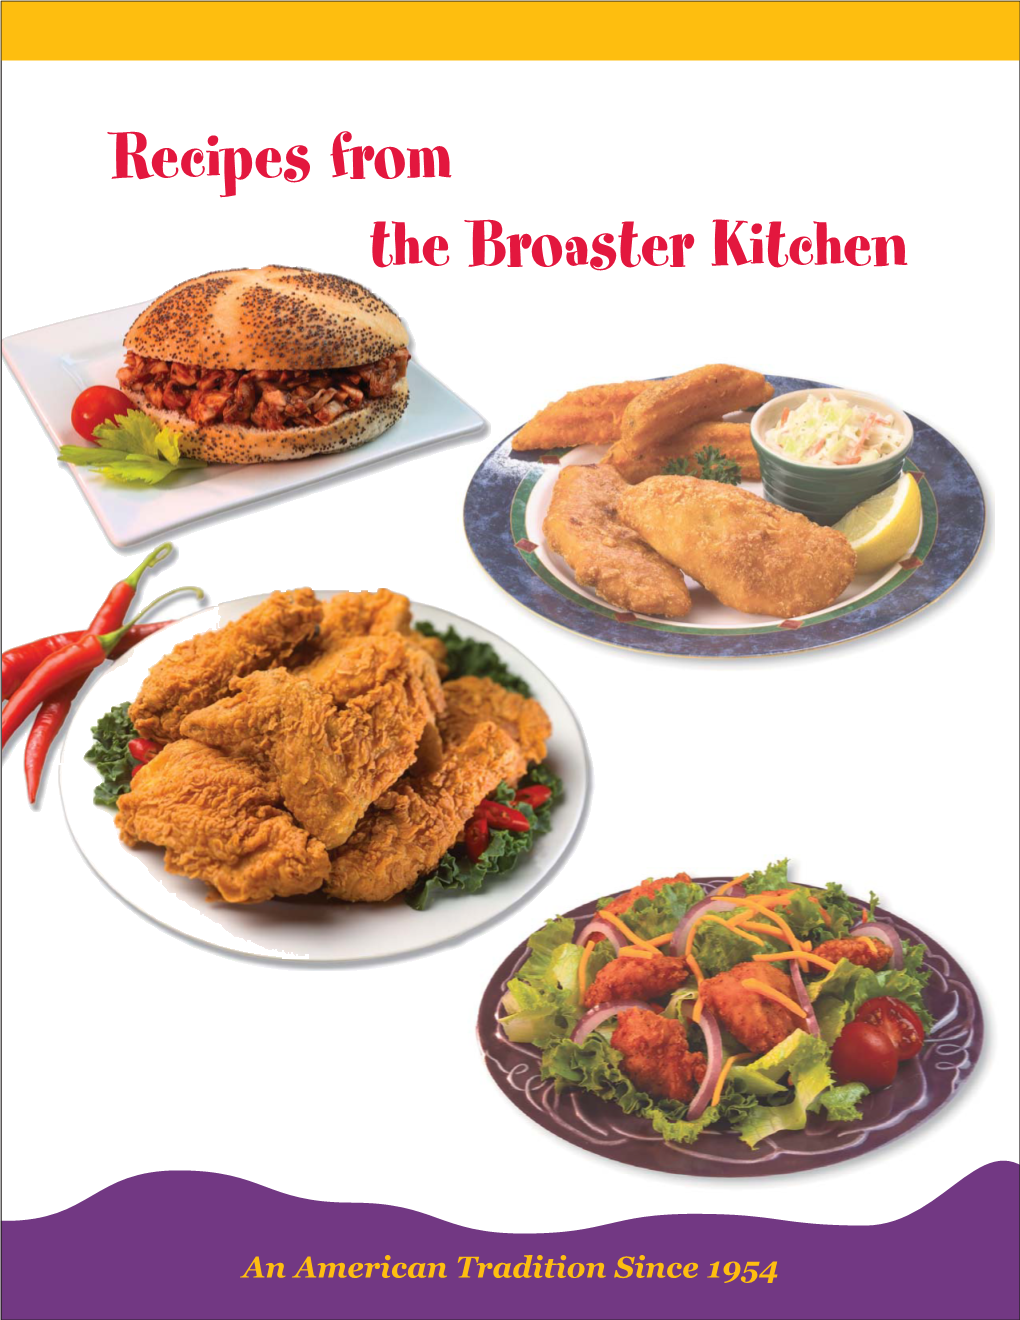 Recipes from the Broaster Kitchen